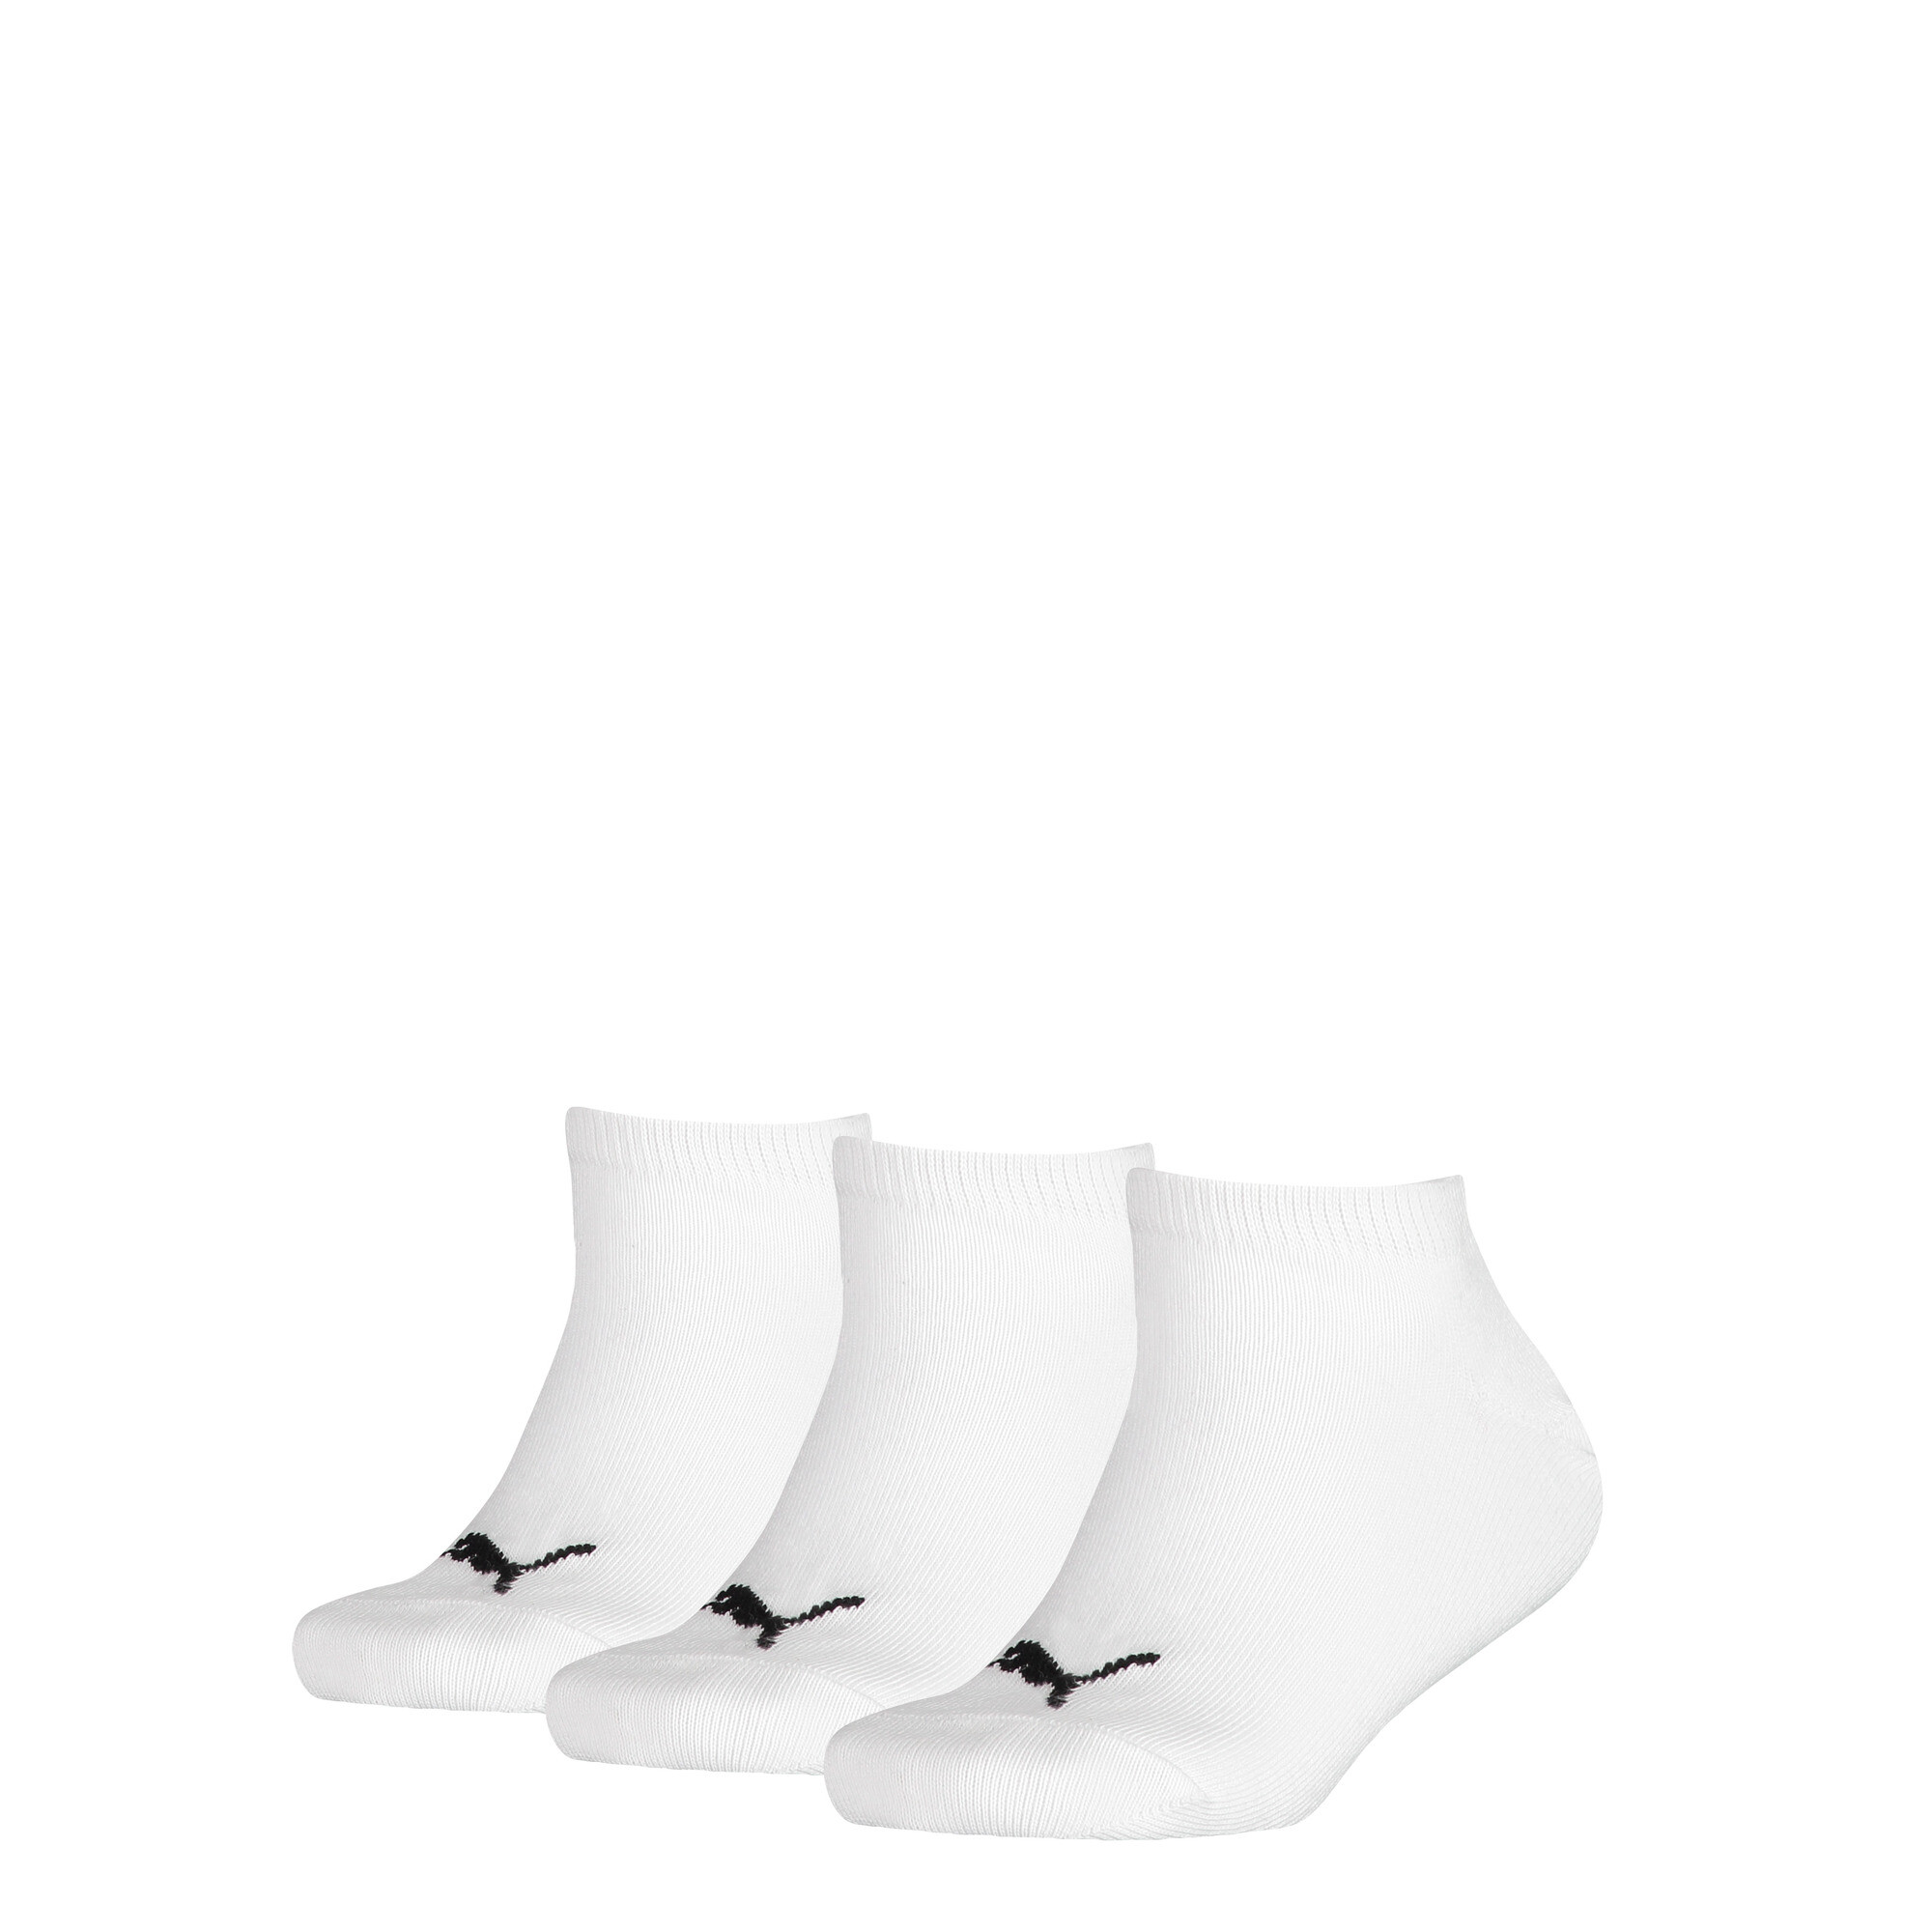 Kids' PUMA Invisible Socks 3 Pack In White, Size 23-26